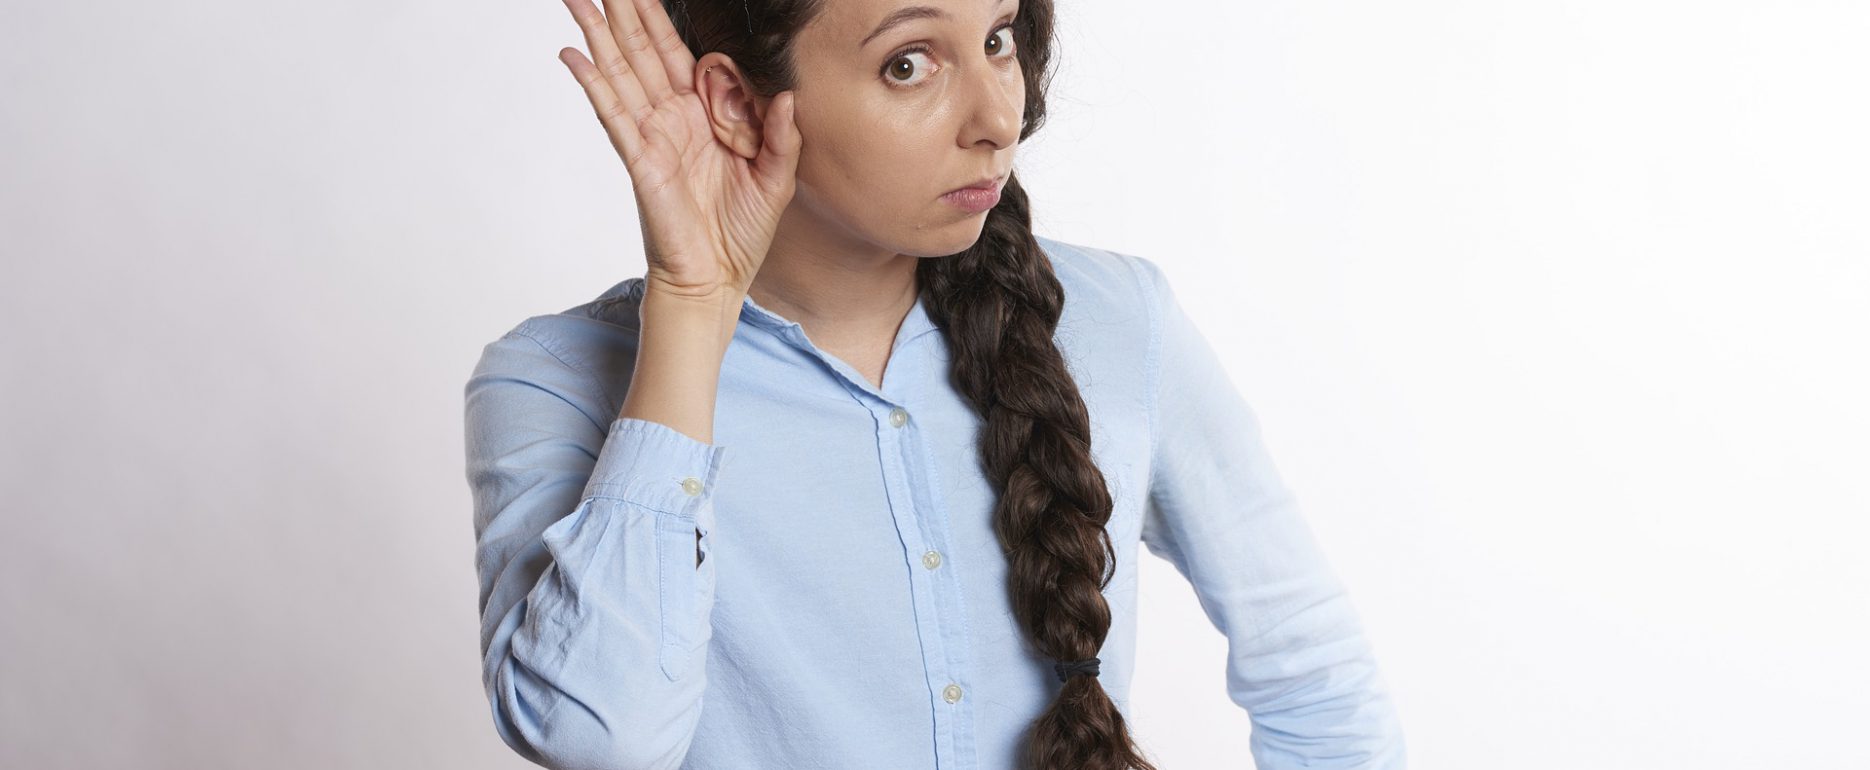 About Hearing Loss. Single-Sided Deafness with woman holding hand behind her right ear